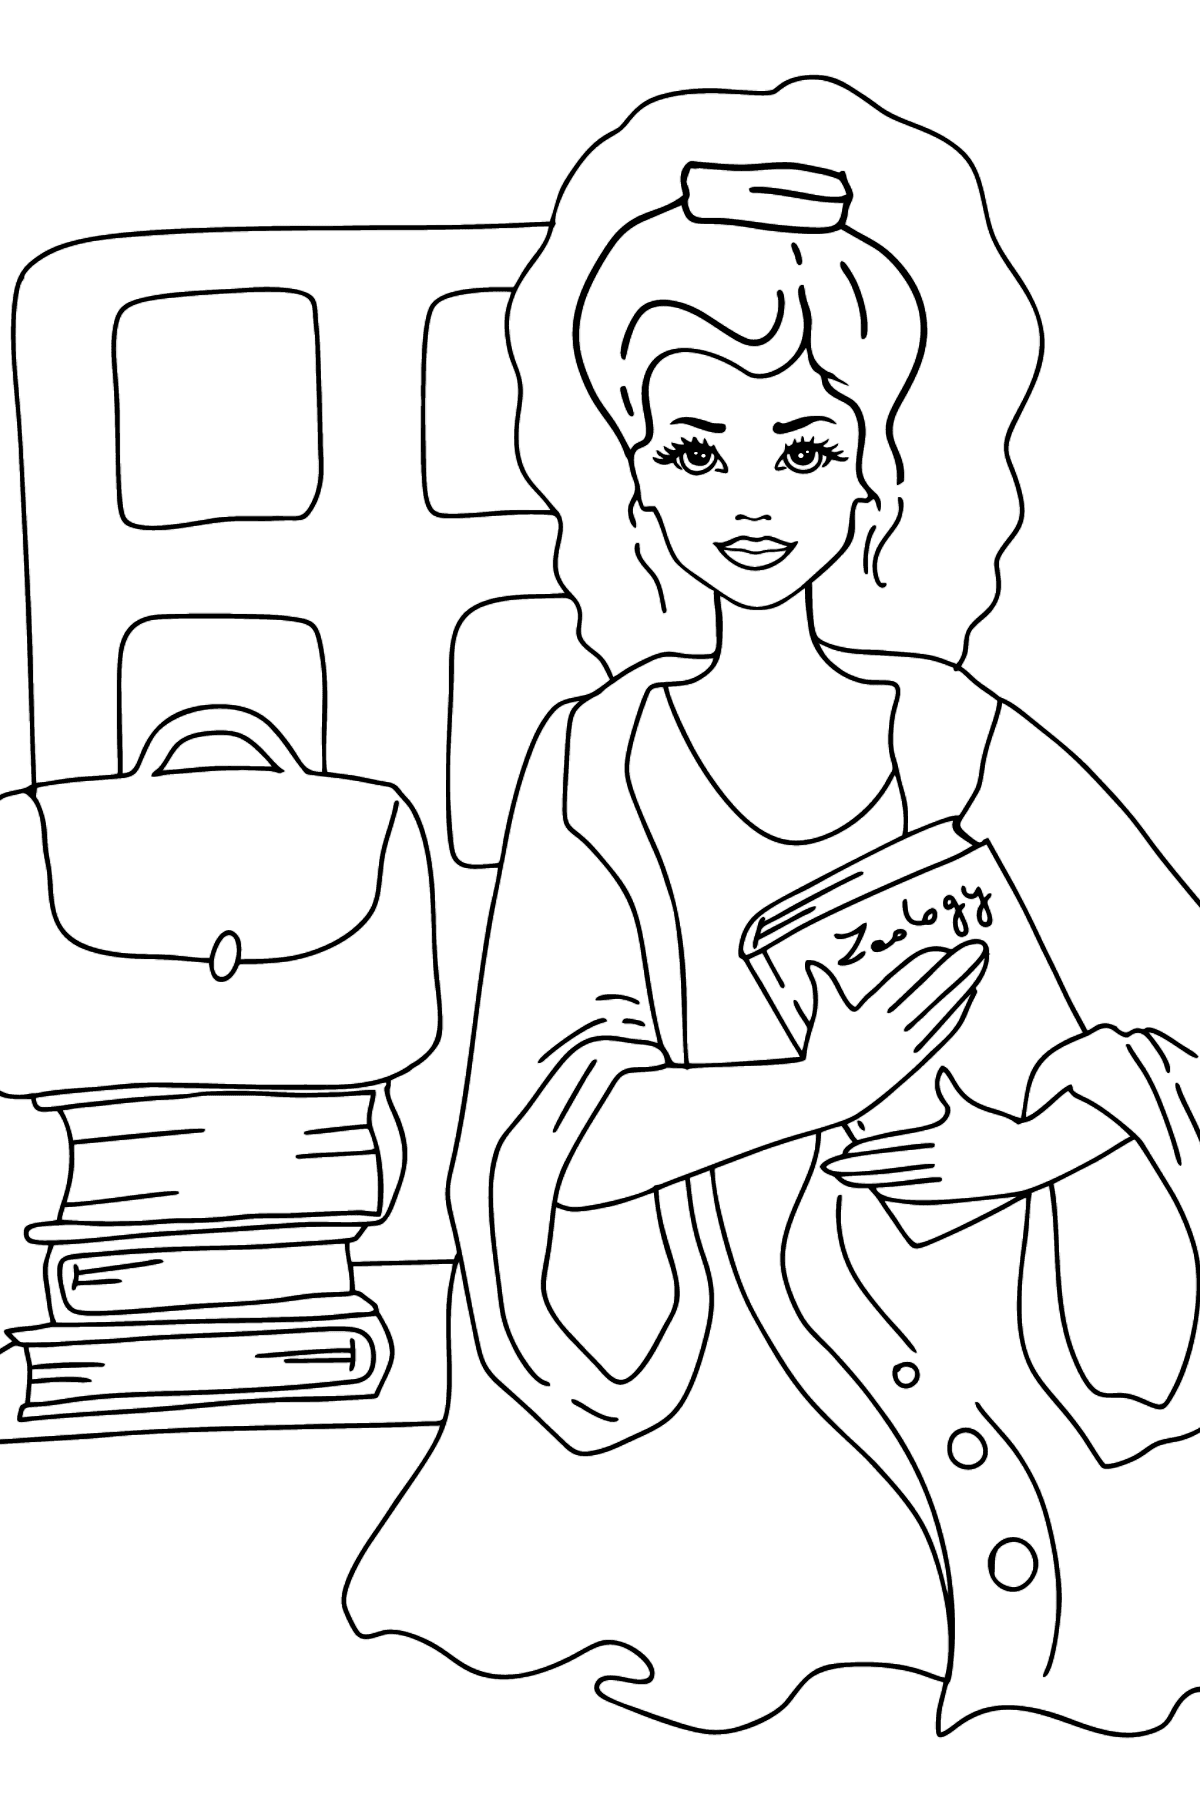 Barbie Doll Student coloring page ♥ Print for Free